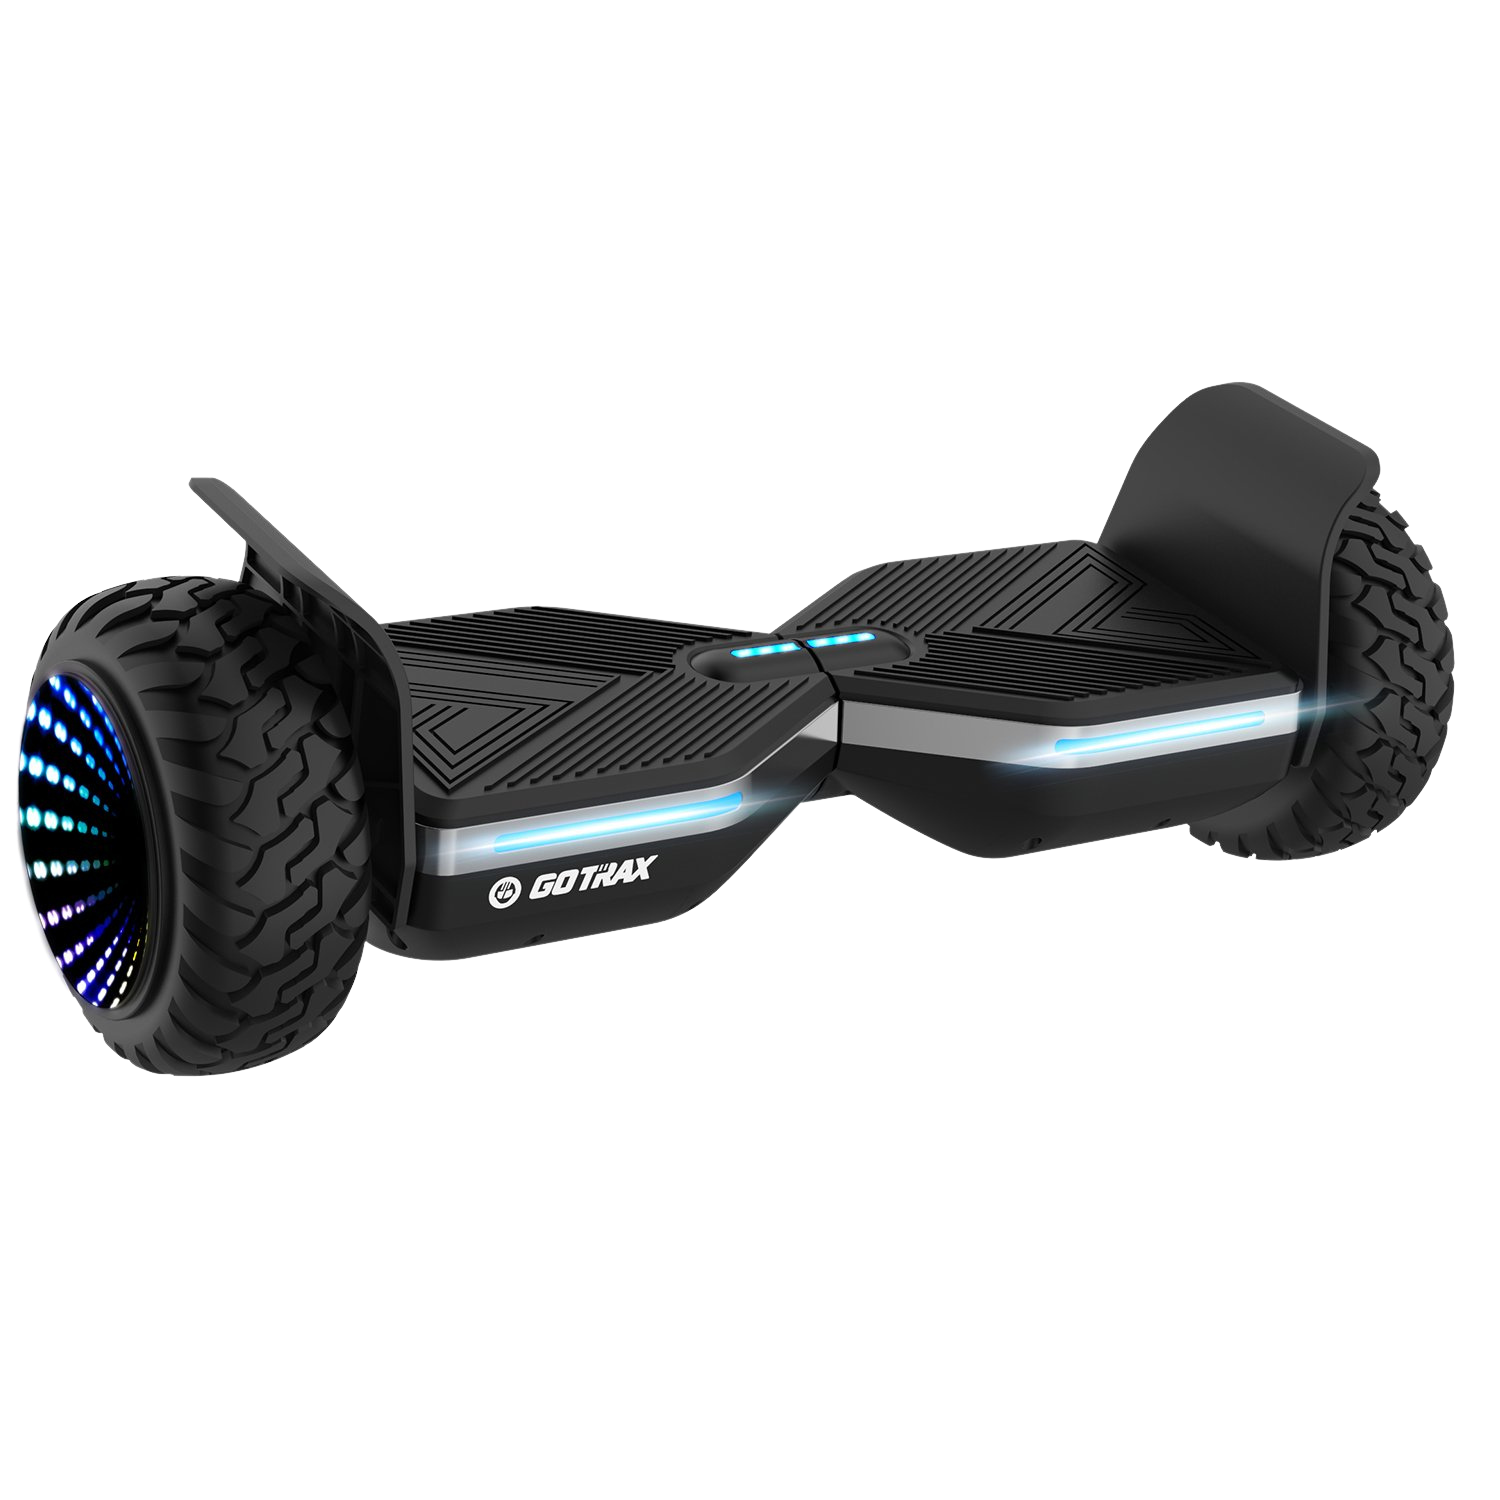 Gotrax Infinity Pro Off-road Self Balancing Hoverboard with Flash light 8.5"-Max 12KM Range & 12KPH Max Speed